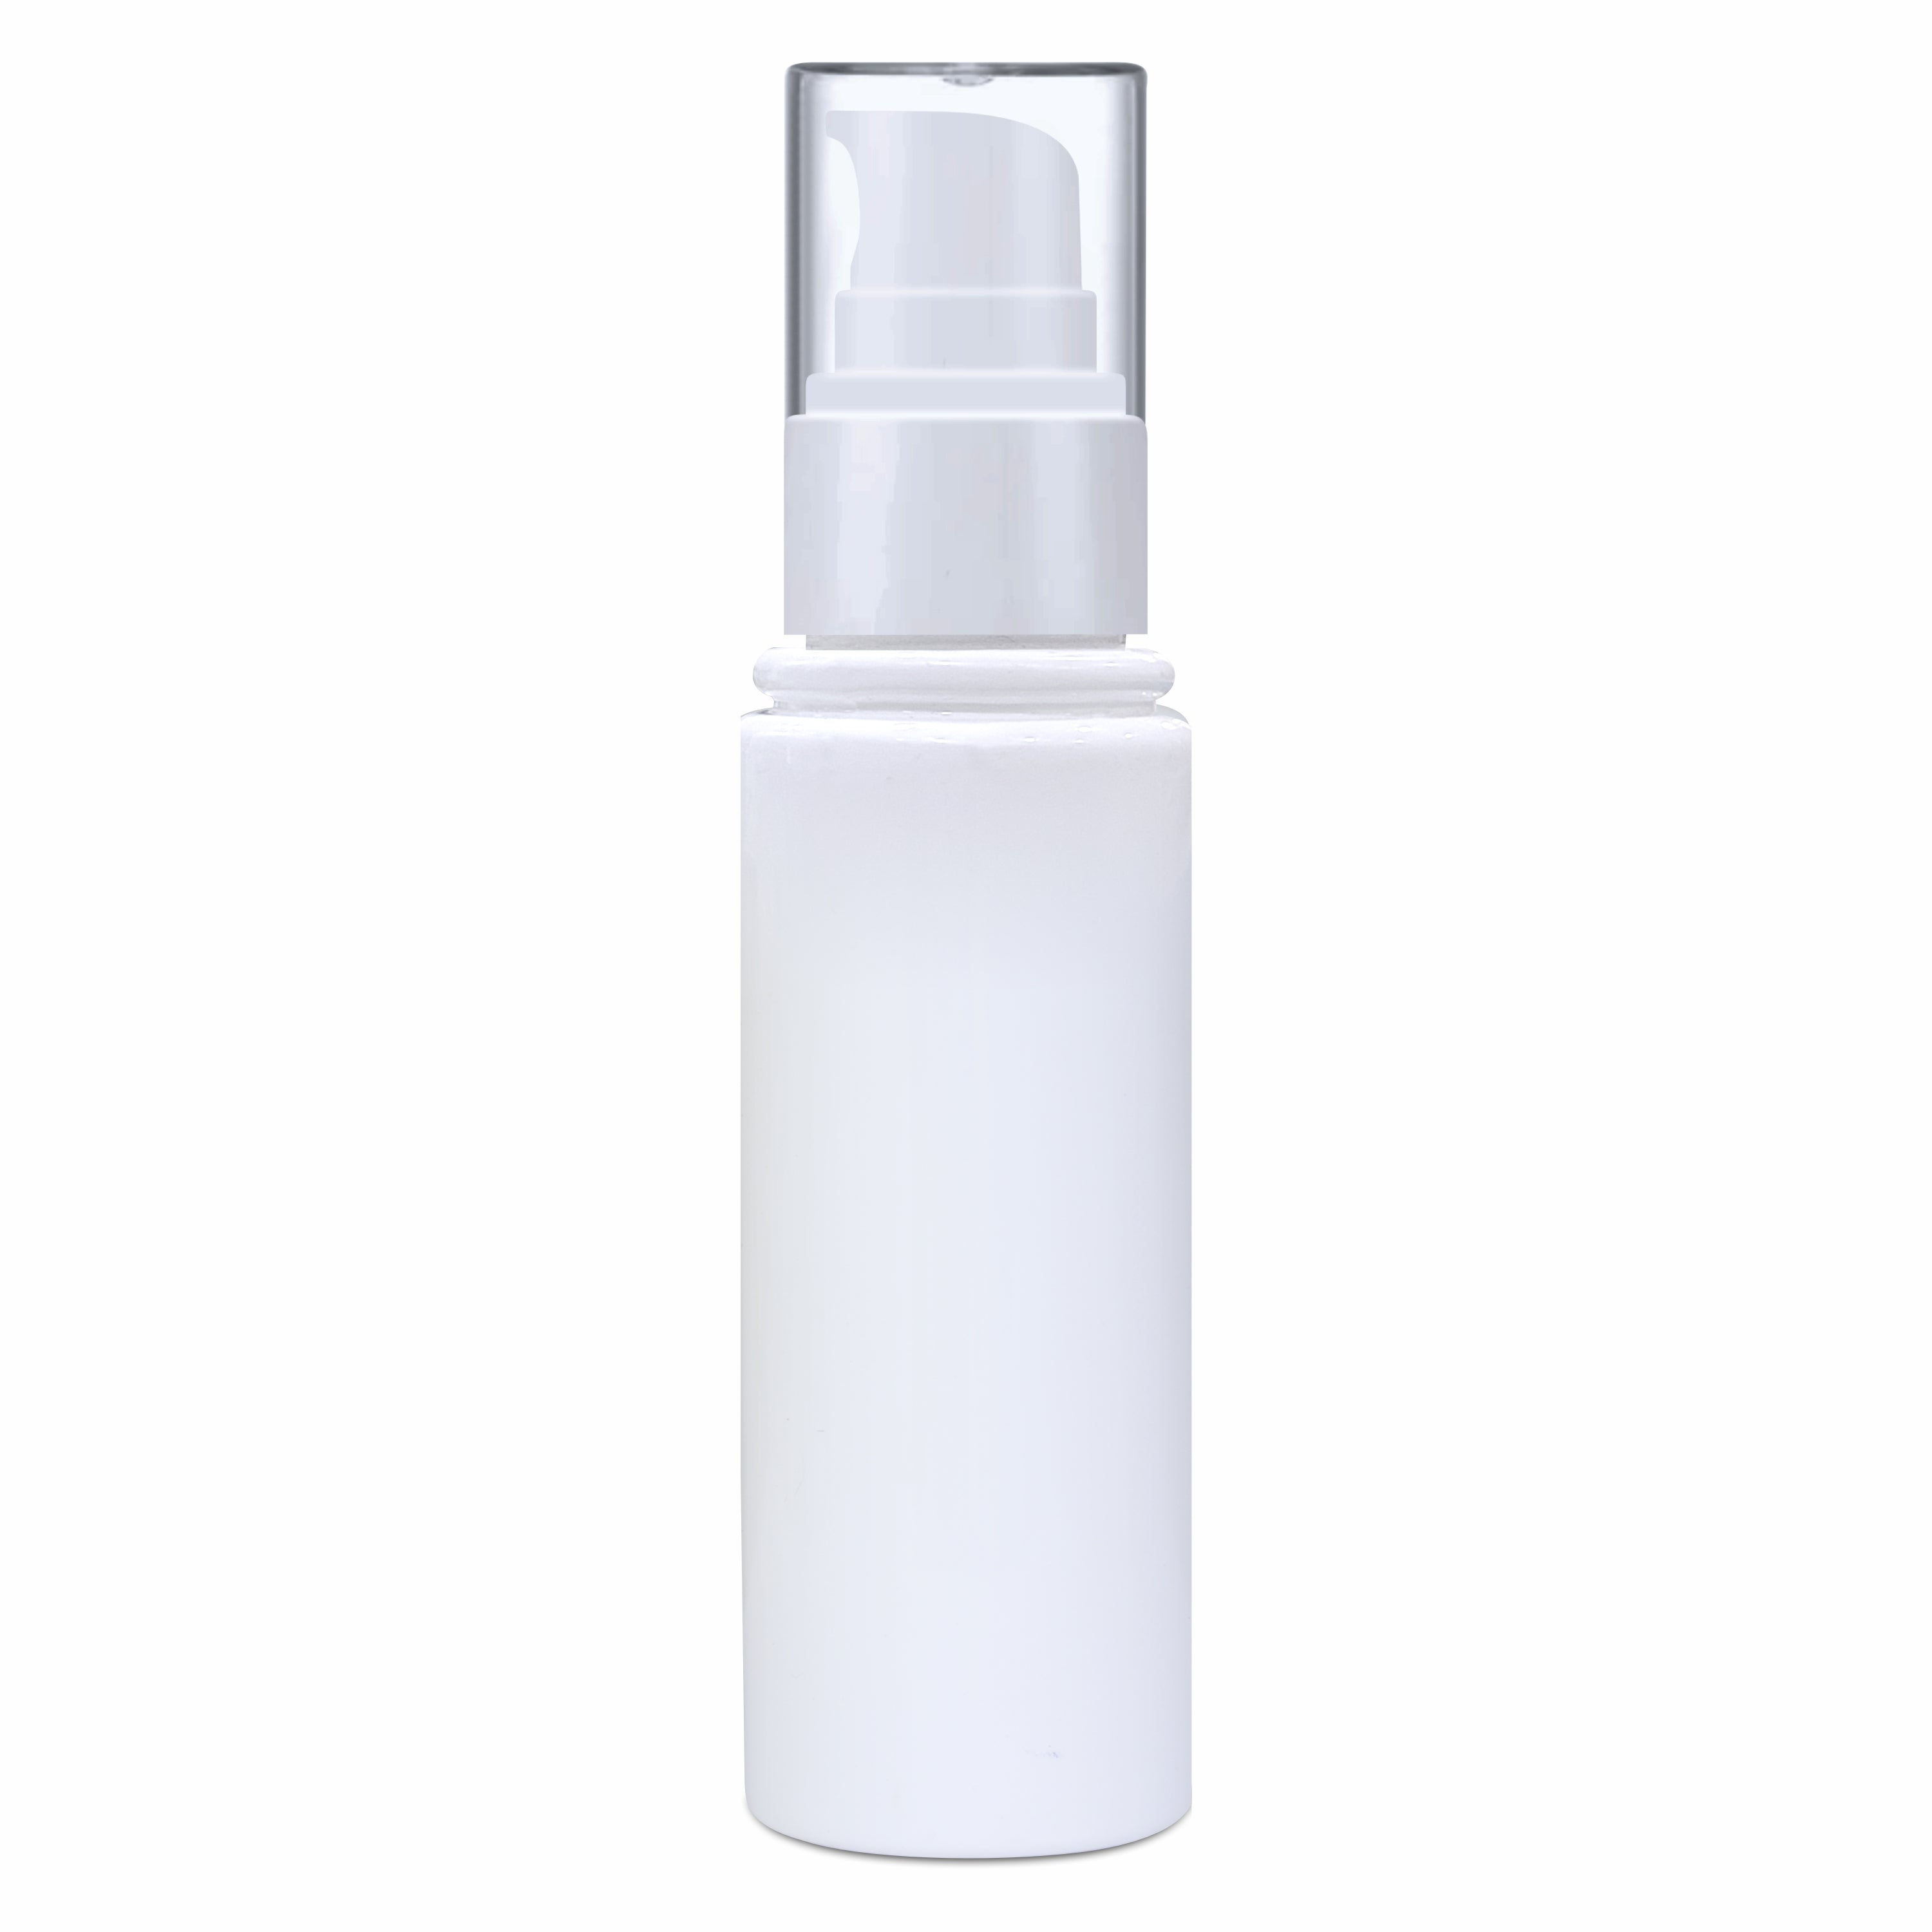 |ZMW60| Milky White Pet Bottle With White Lotion Pump Available Size_50ML